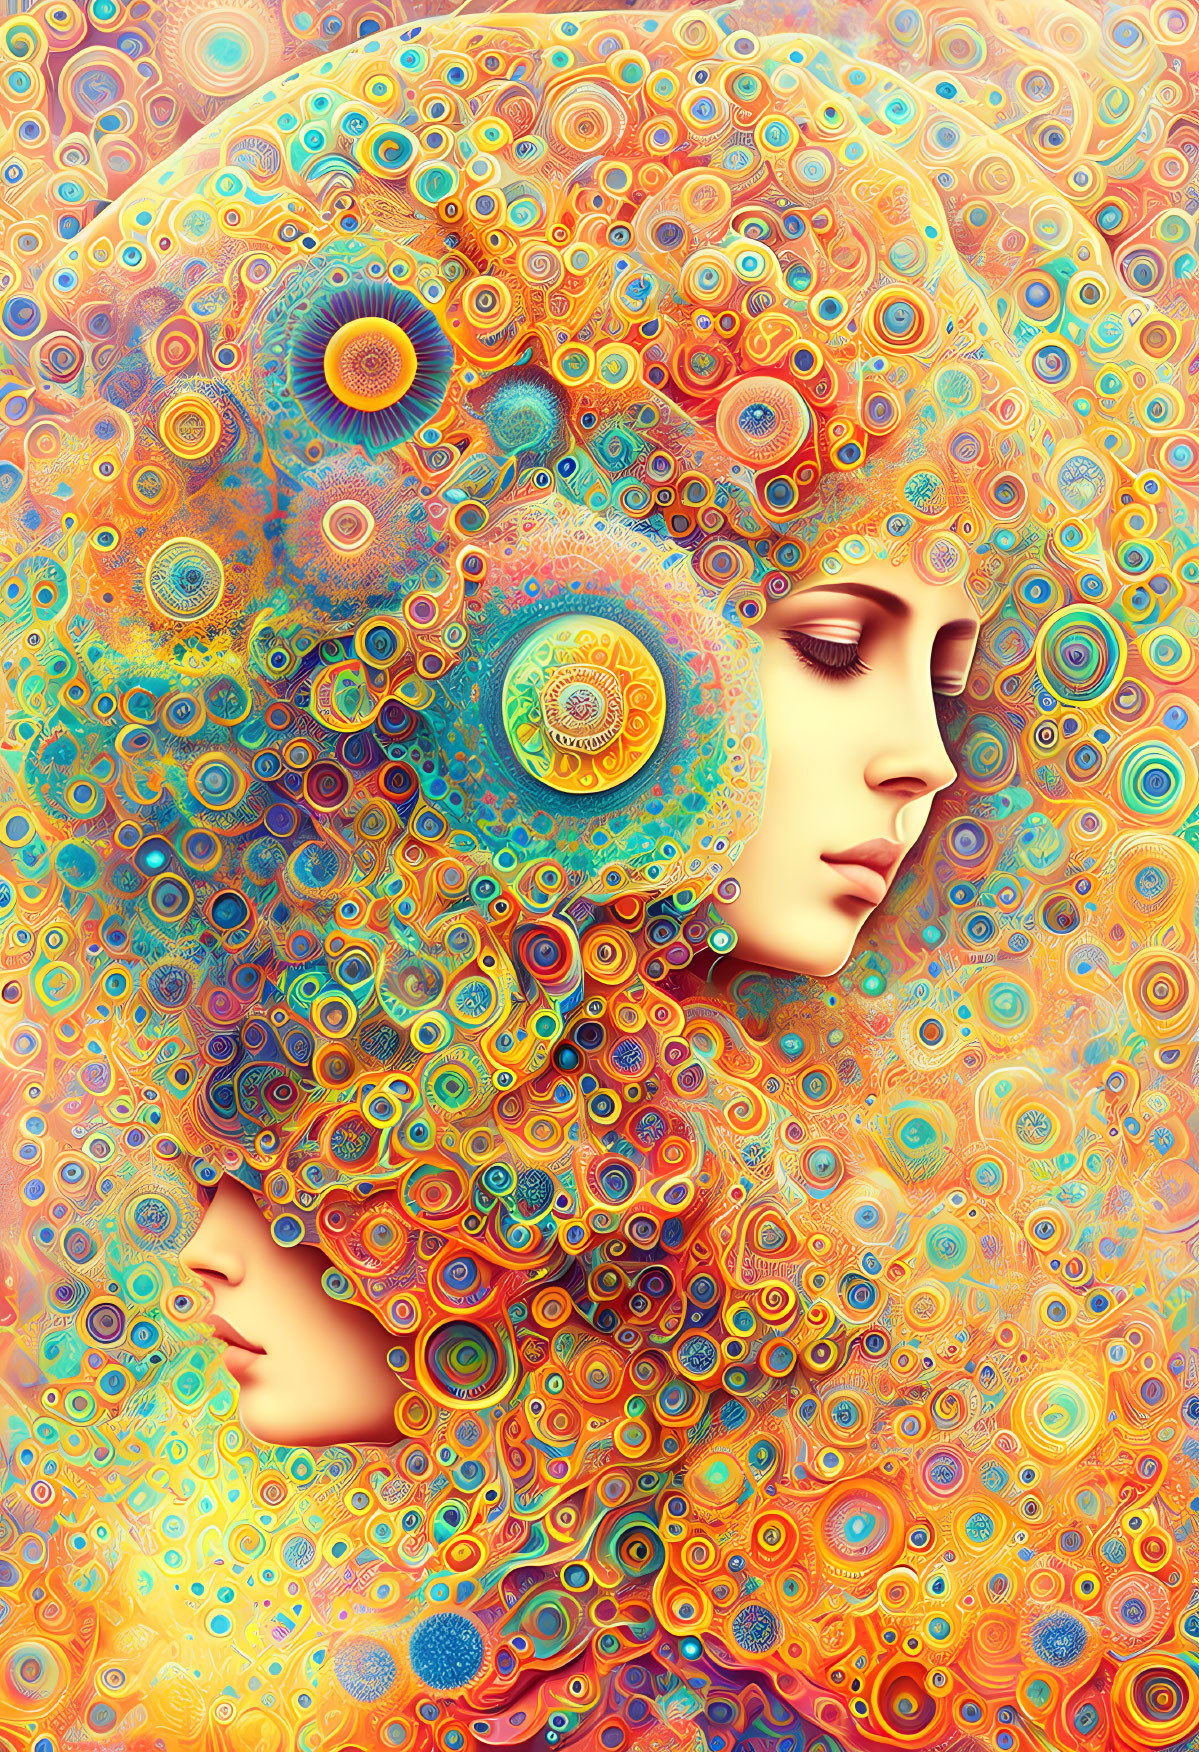 Colorful Digital Artwork: Two Faces in Profile with Intricate Mandala Patterns